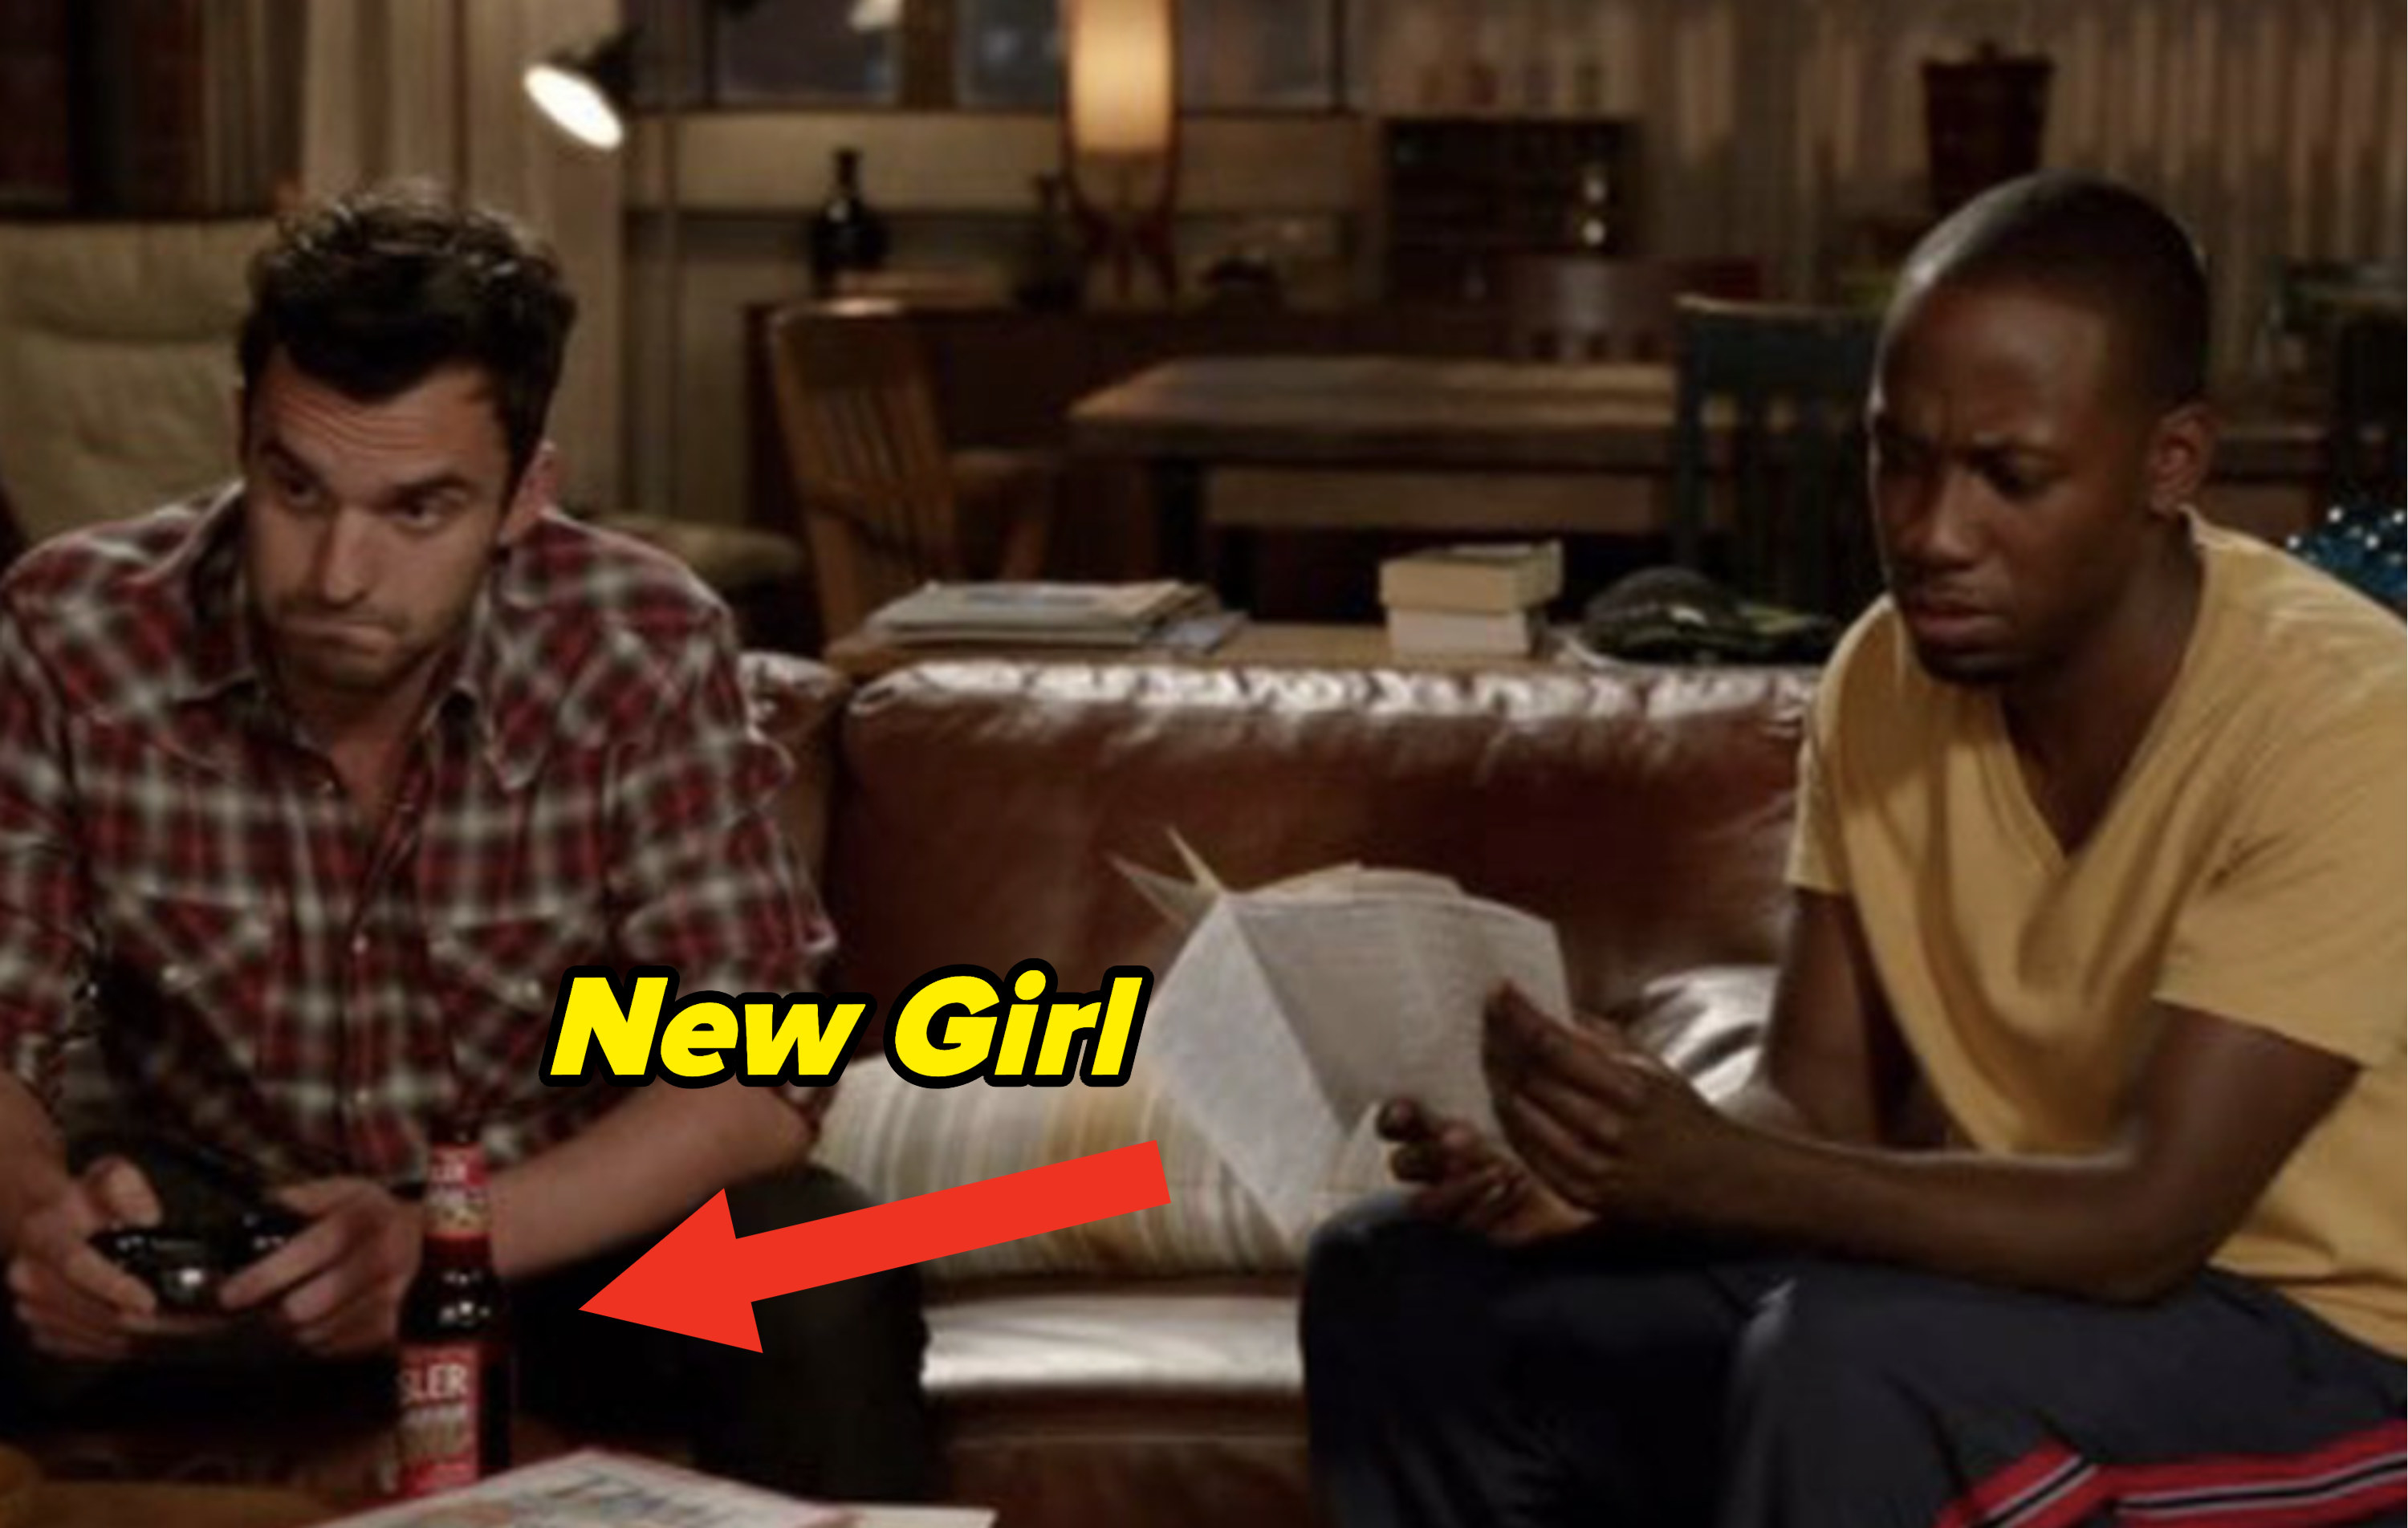 the beer on new girl